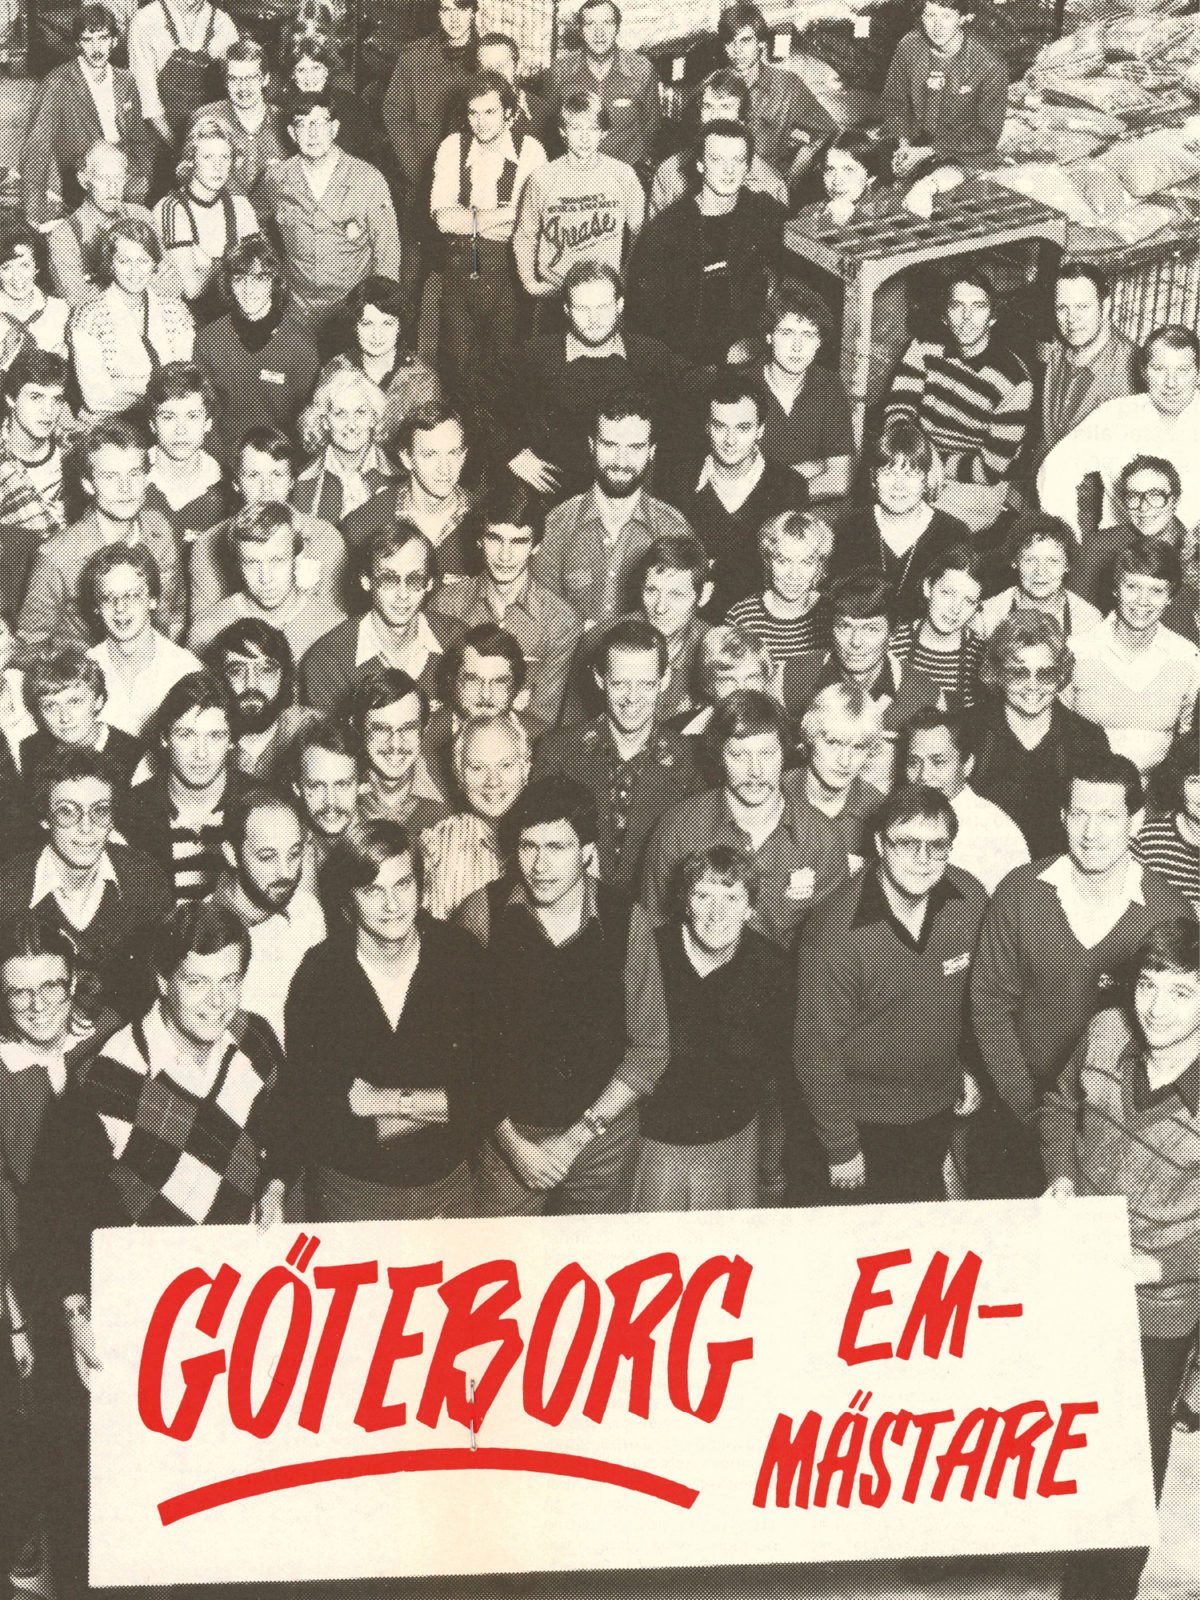 Group photo of large group of IKEA staff in 1980s clothing, behind banner saying Gothenburg, European champions.